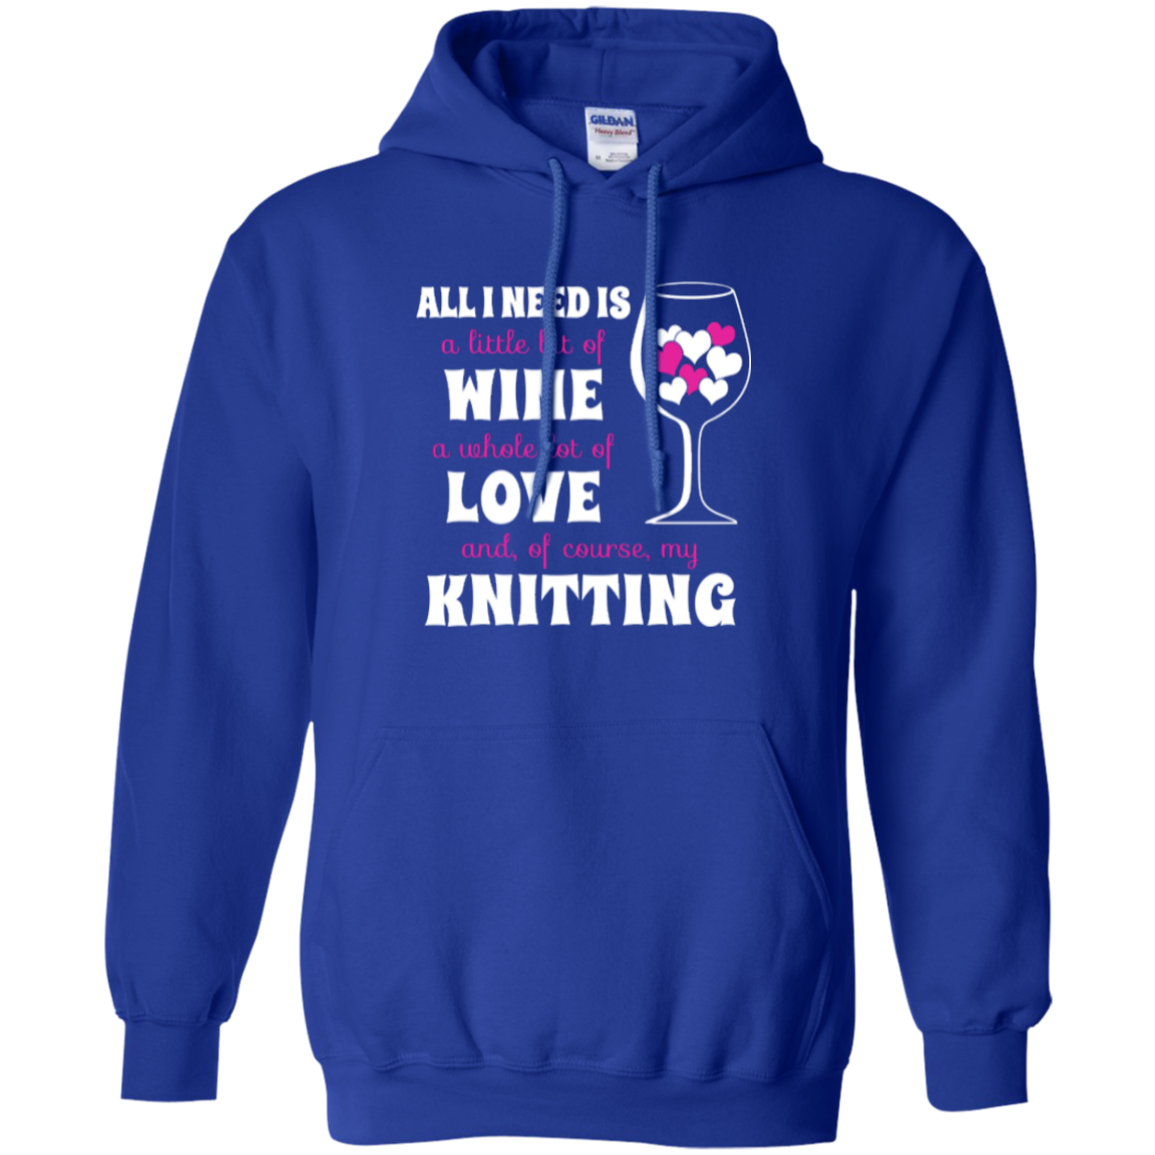 All I Need is Wine-Love-Knitting Pullover Hoodies - Crafter4Life - 9